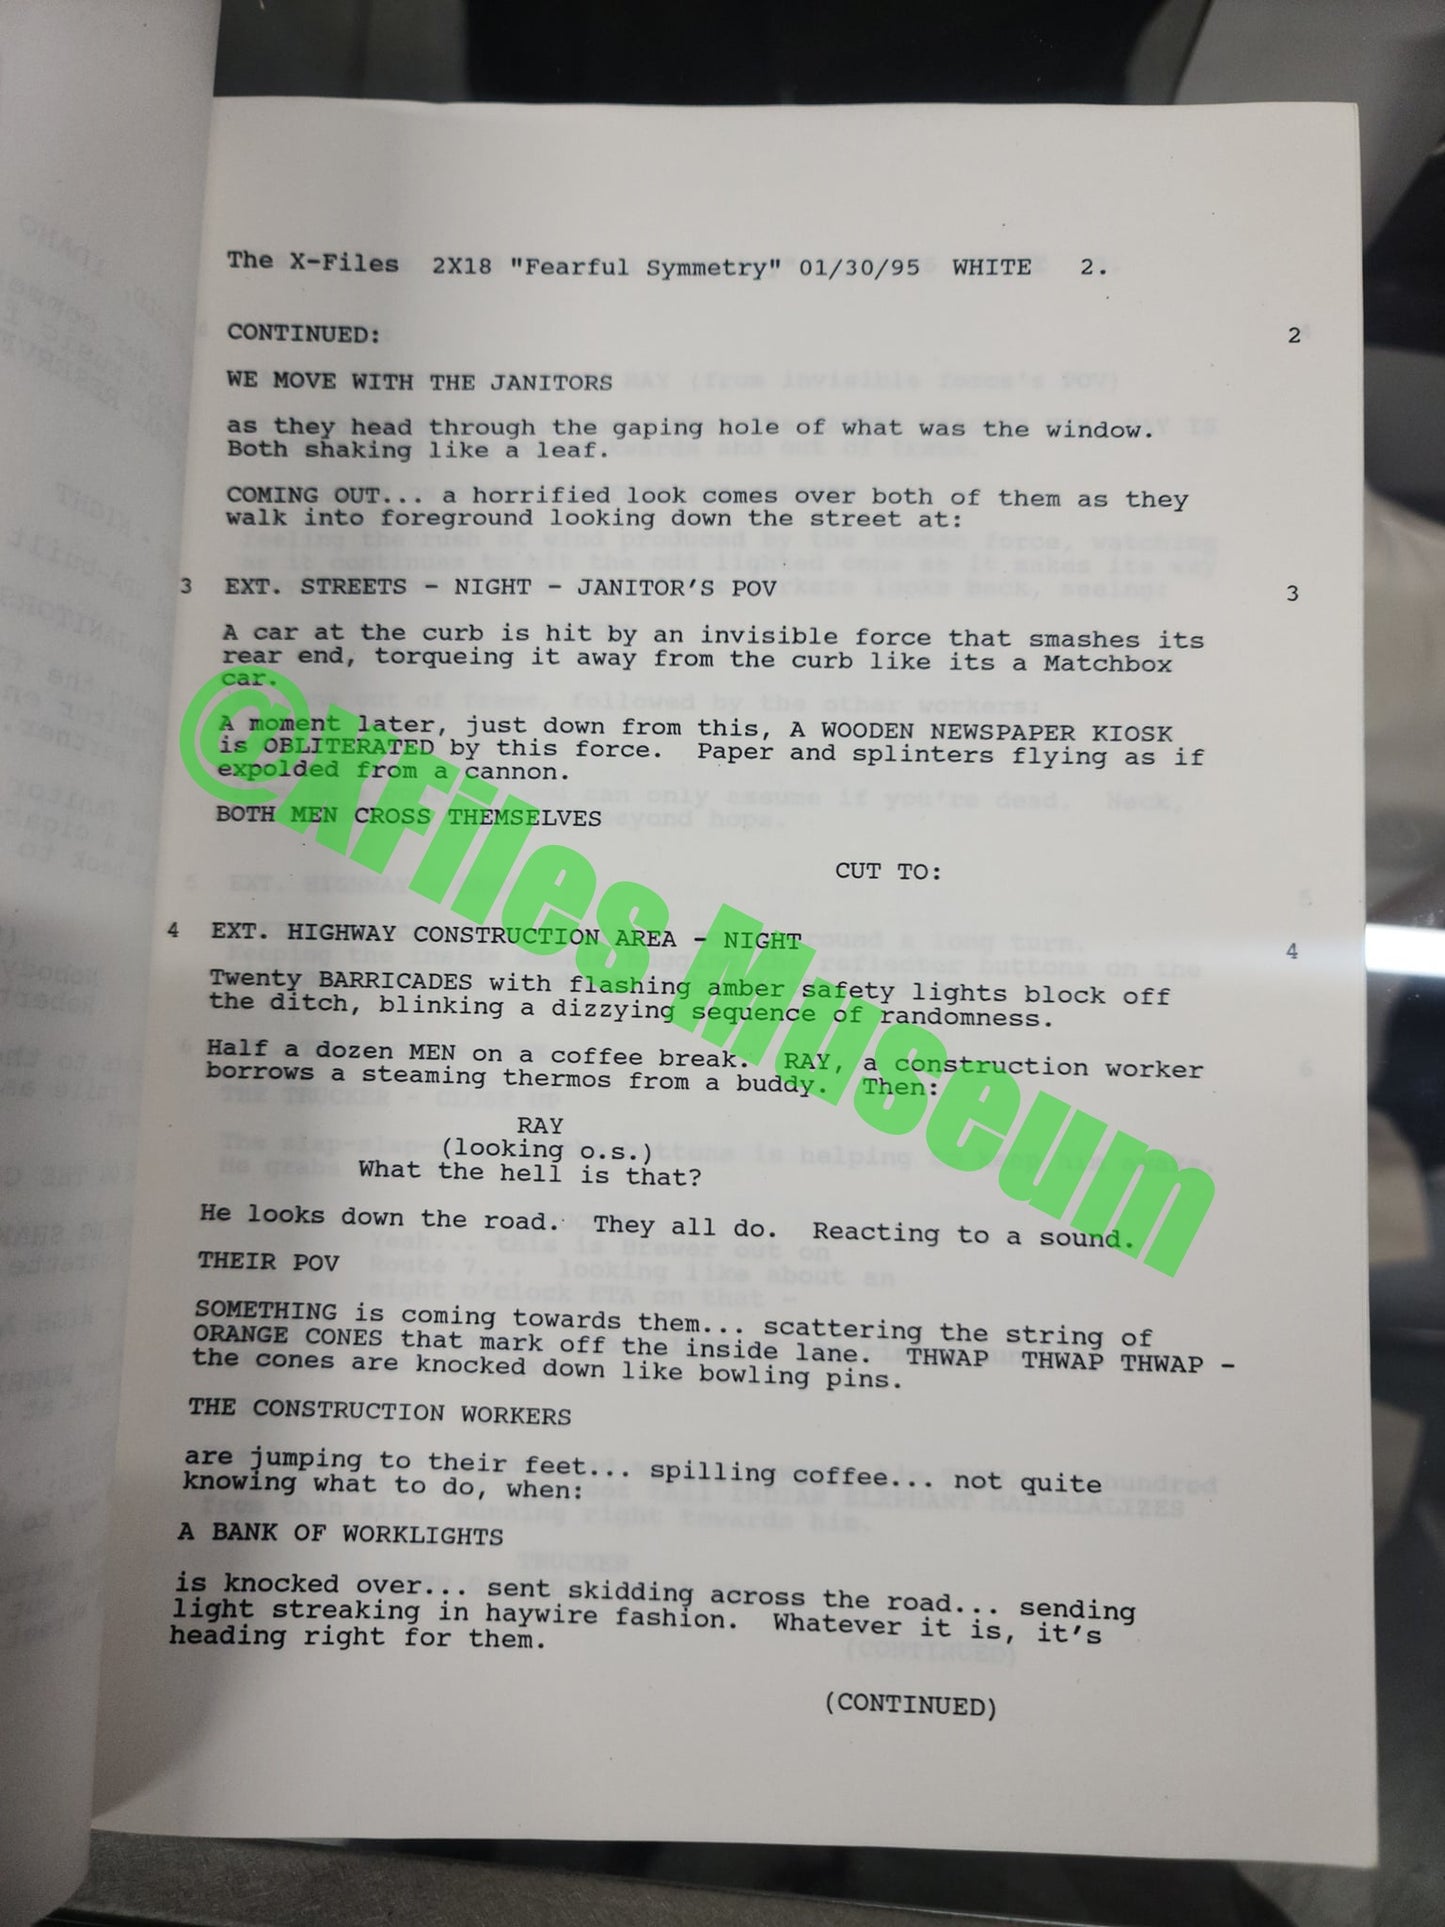 X Files Script -Episode "FEARFUL SYMMETRY" - Not Production Used